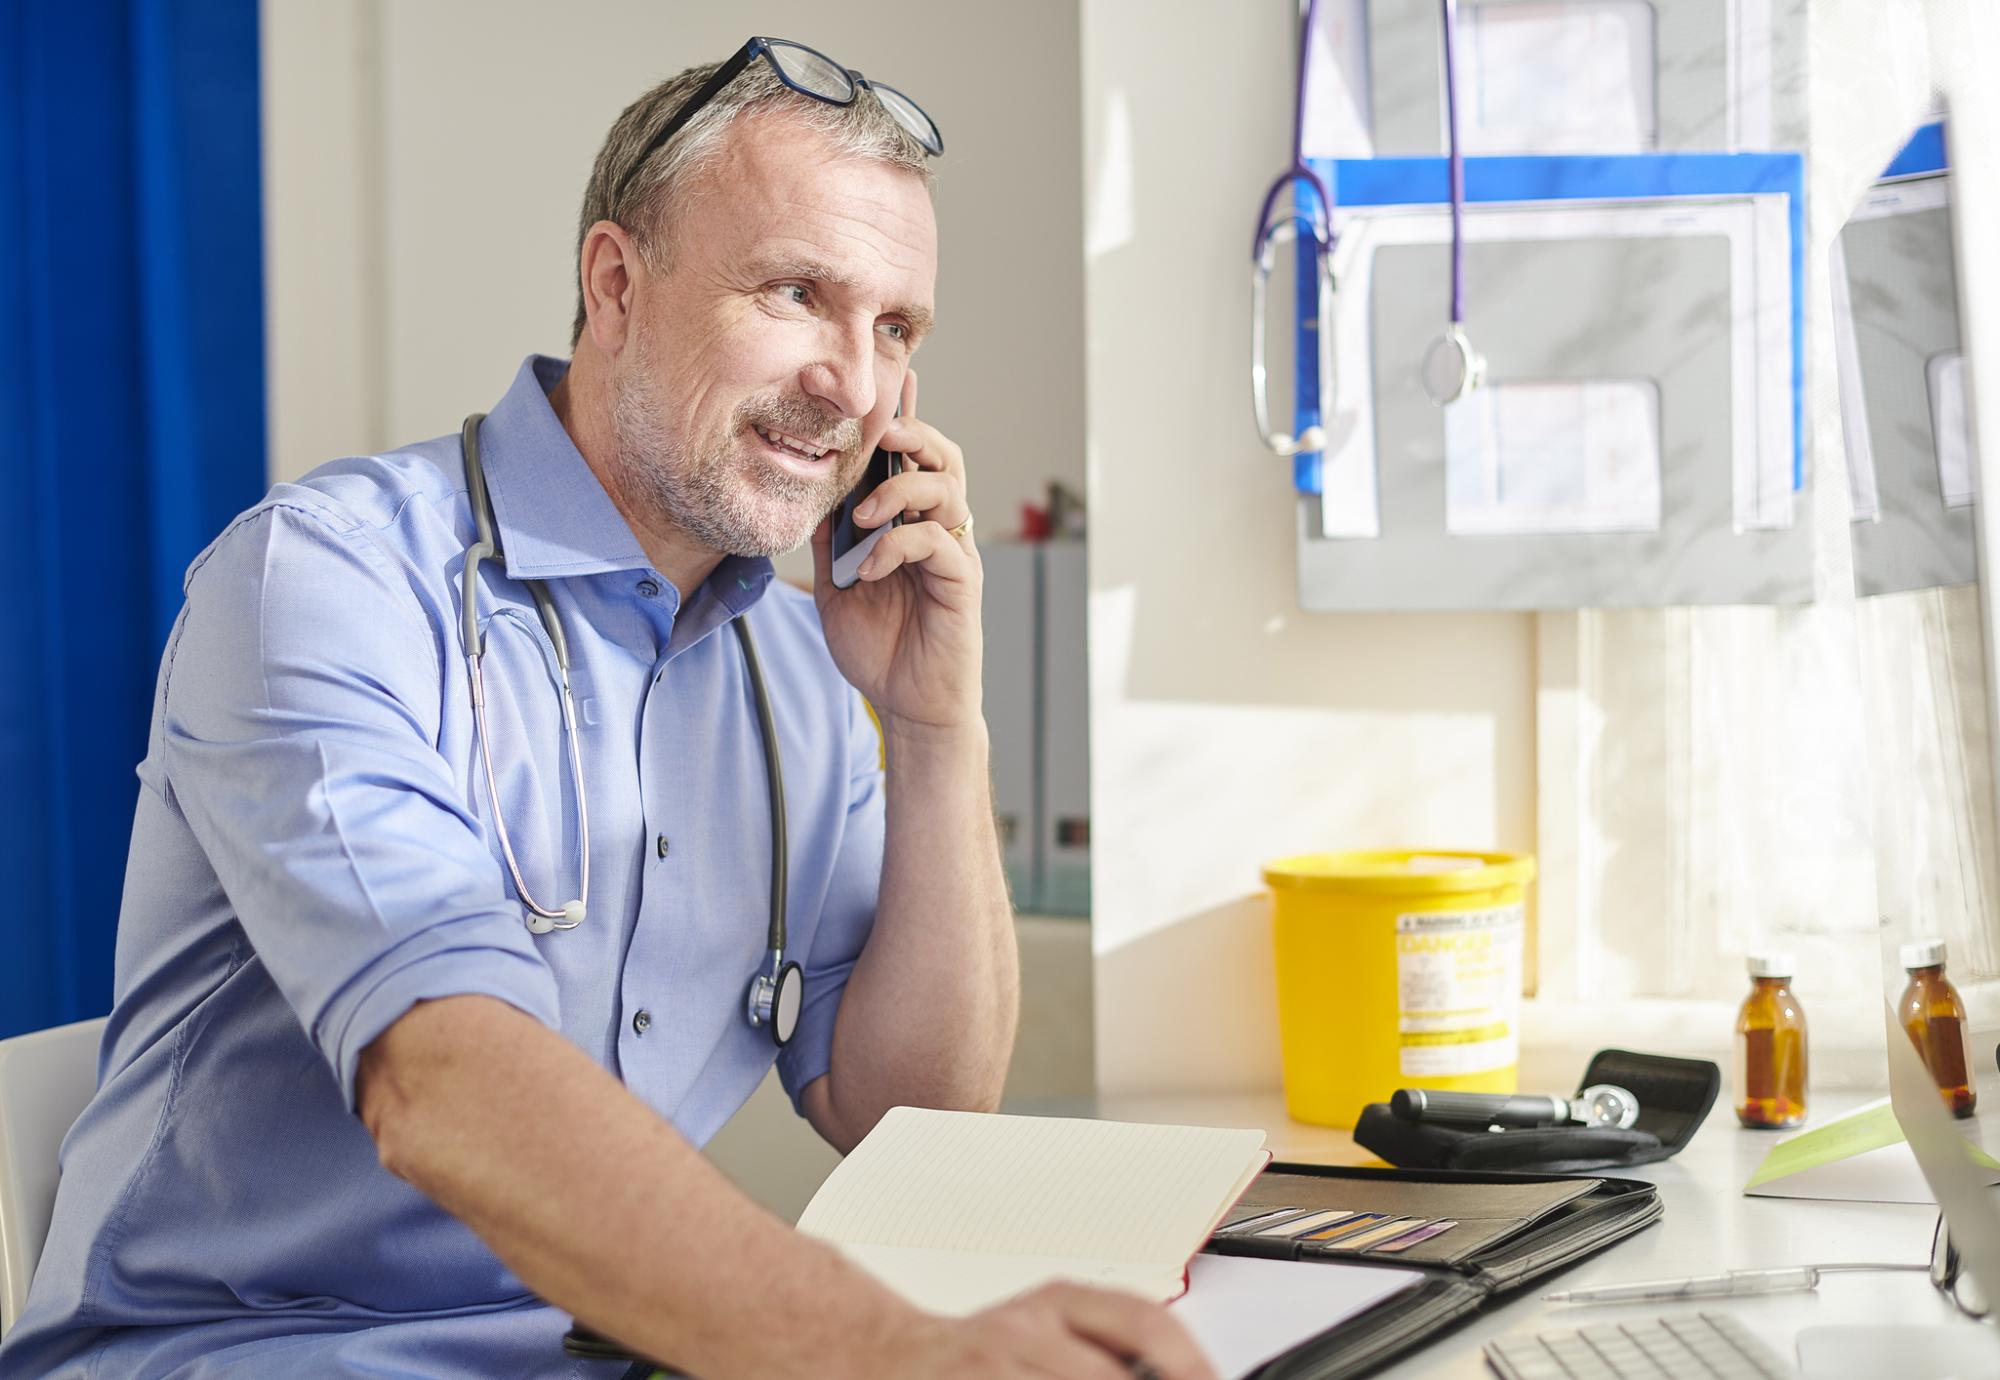 Consultant using the phone to speak with colleagues